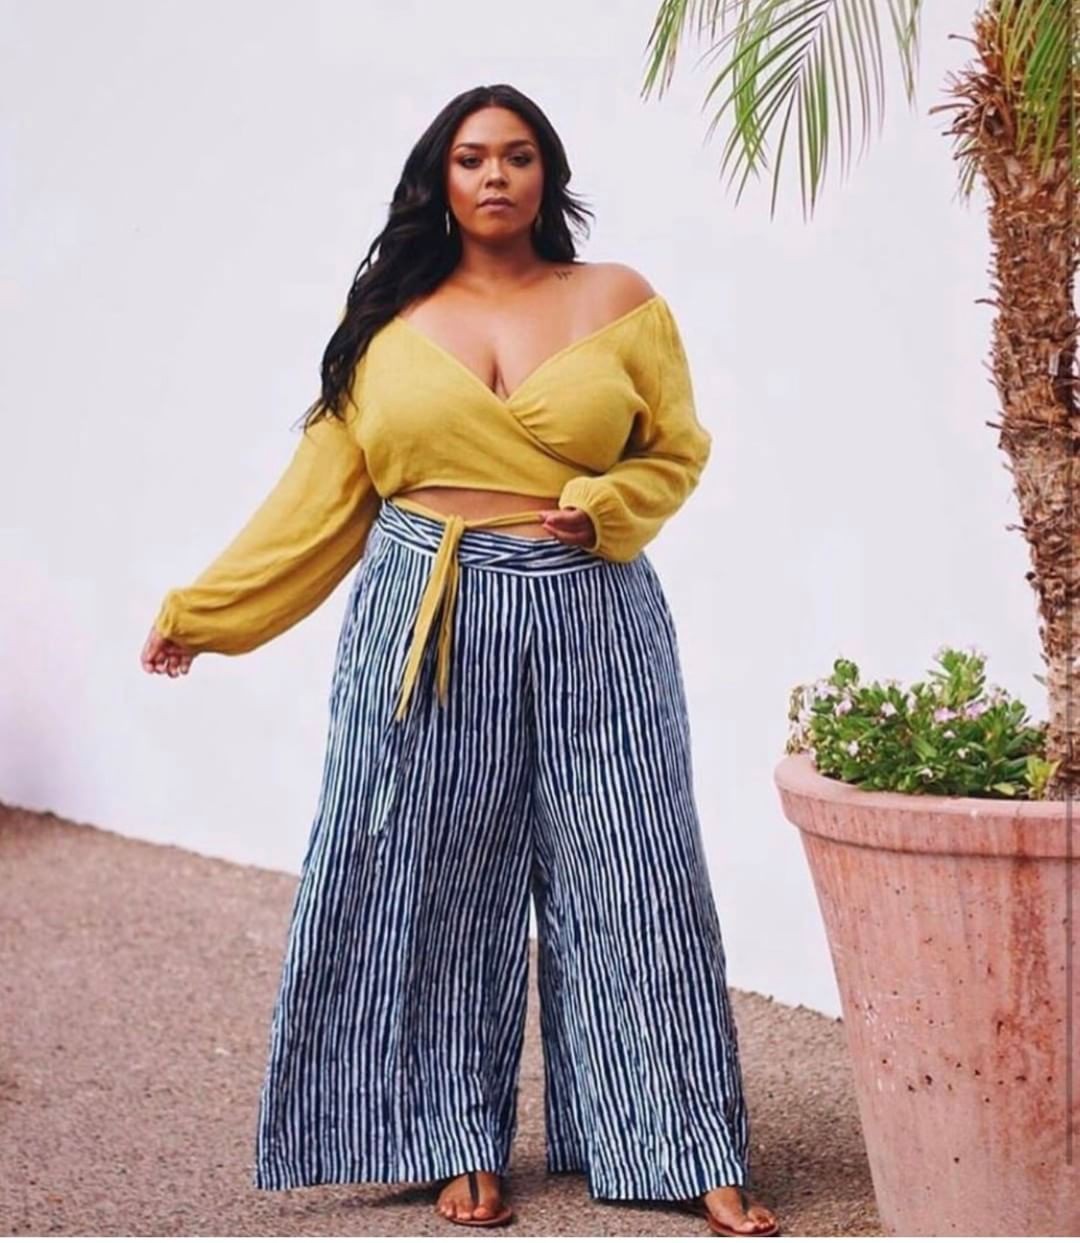 Plus Size Pants For Curvy Women, Boat neck, Plus-size model: Boat neck, Plus-Size Model, Plus size outfit, Casual Outfits 